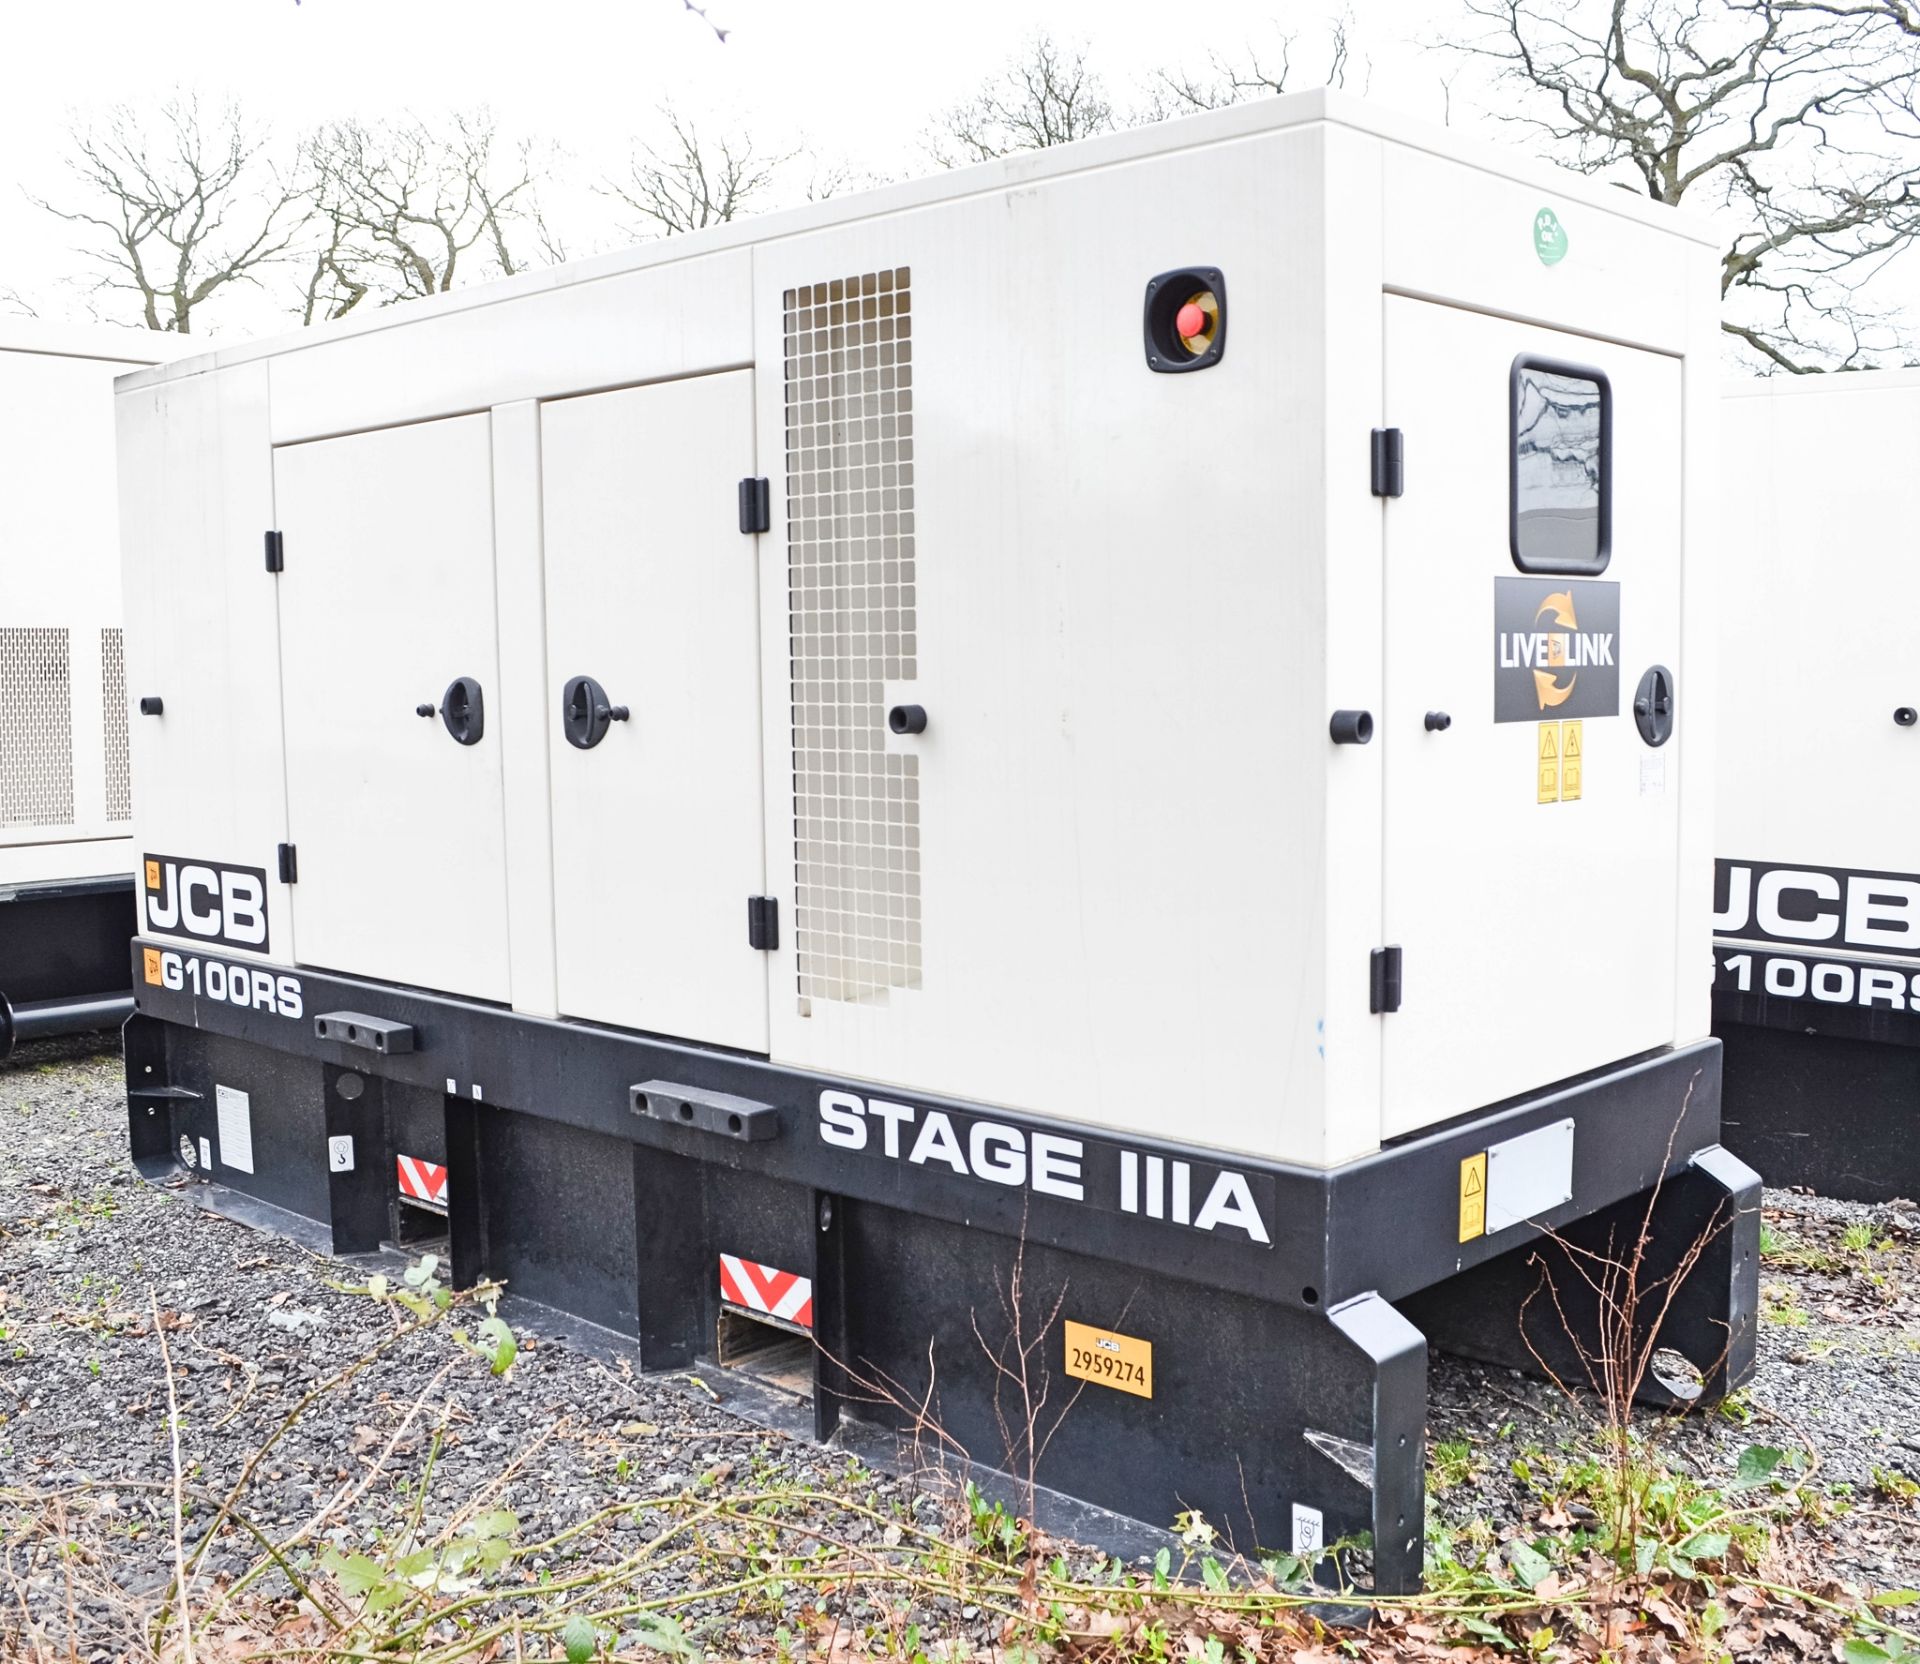 JCB G100 RS 100 kva diesel driven generator Year: 2021 S/N: 2959274 Recorded Hours: 1001 - Image 4 of 12